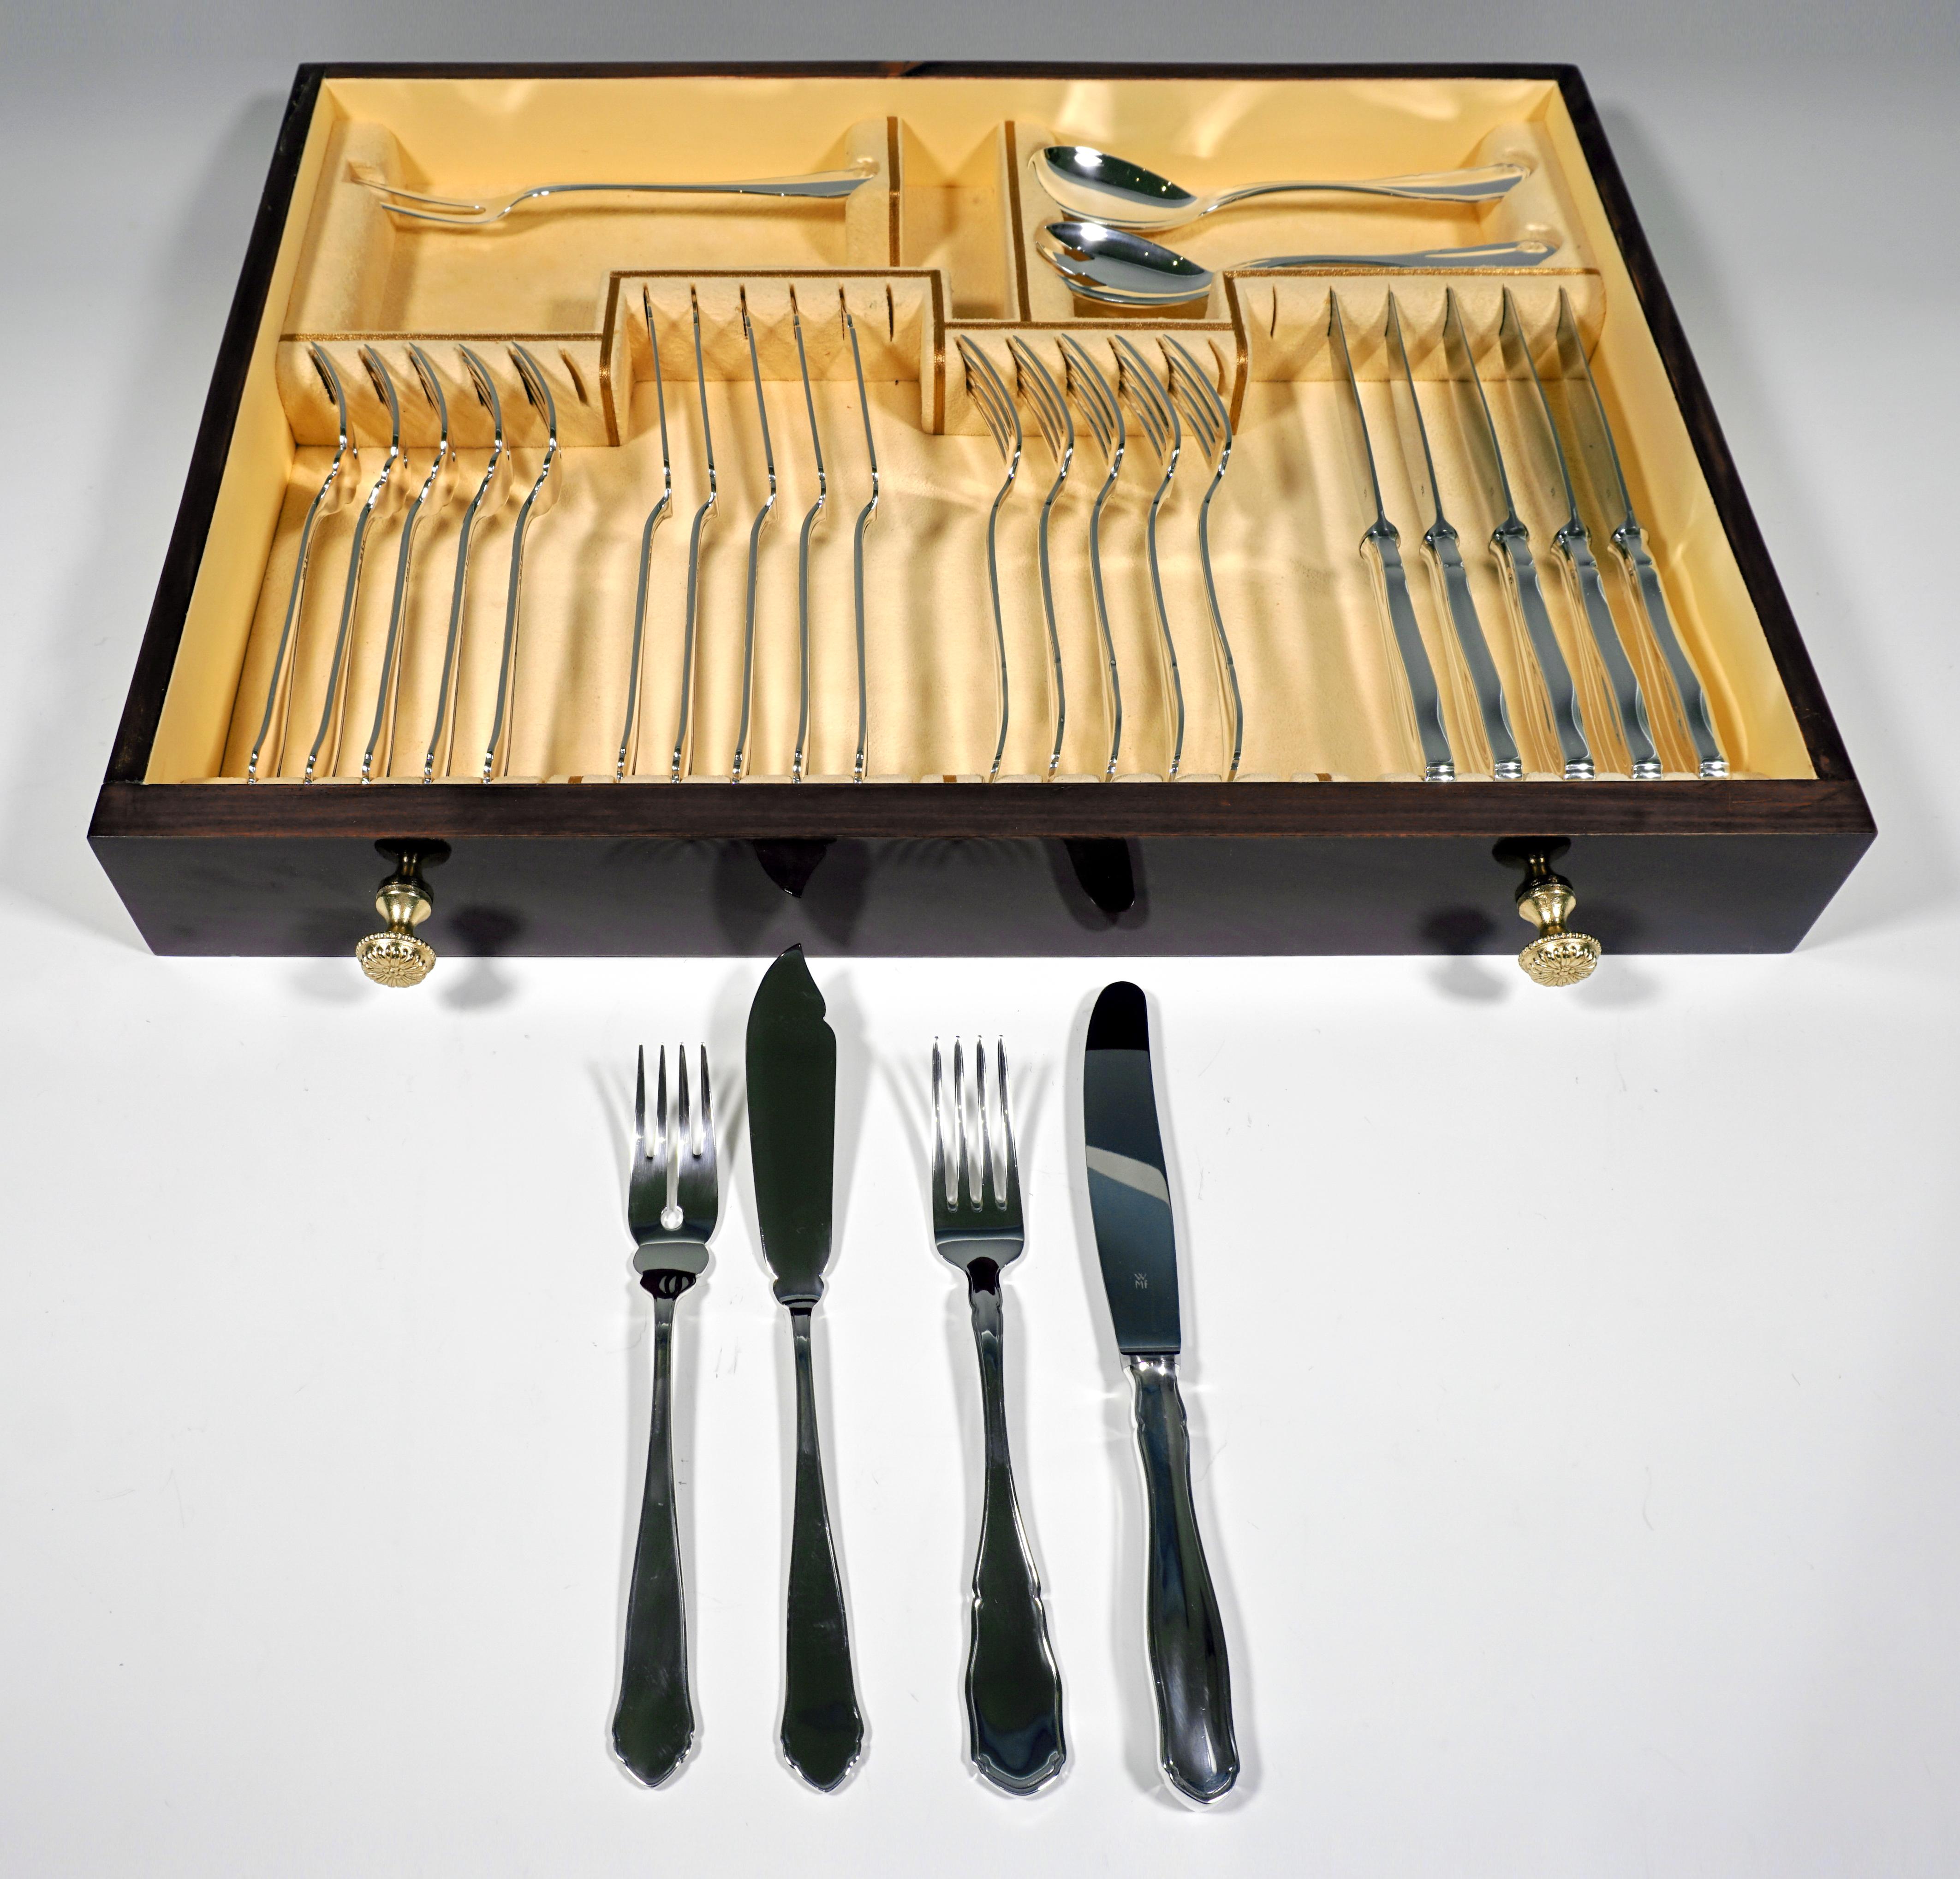 Art Deco Silver Cutlery Set For 6 People in Showcase, Germany & Vienna, ca 1925 2